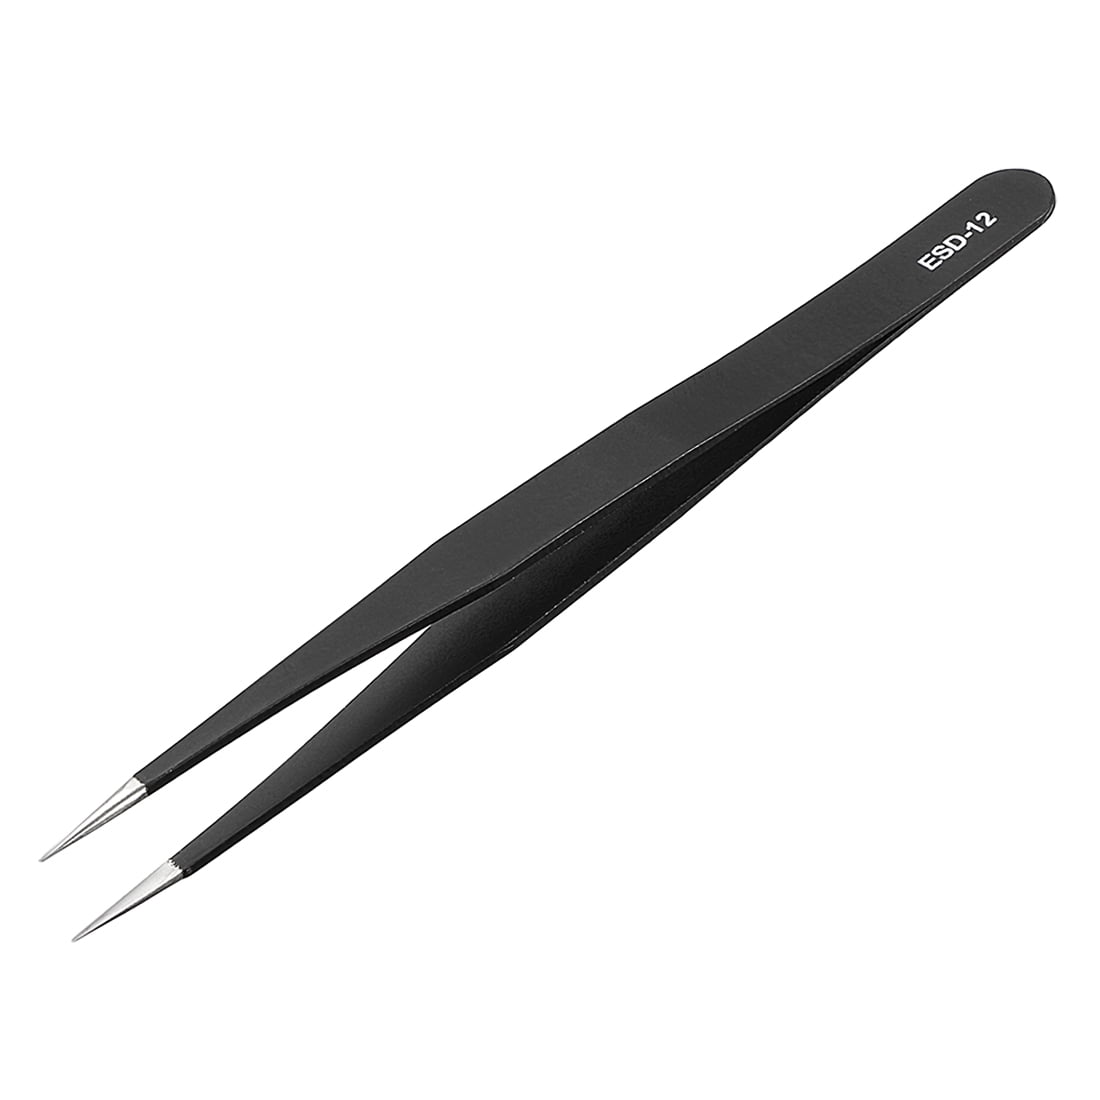 Straight Fine Tip Anti-Static ESD12 Steel Tweezers Electronic Stainless Tools 